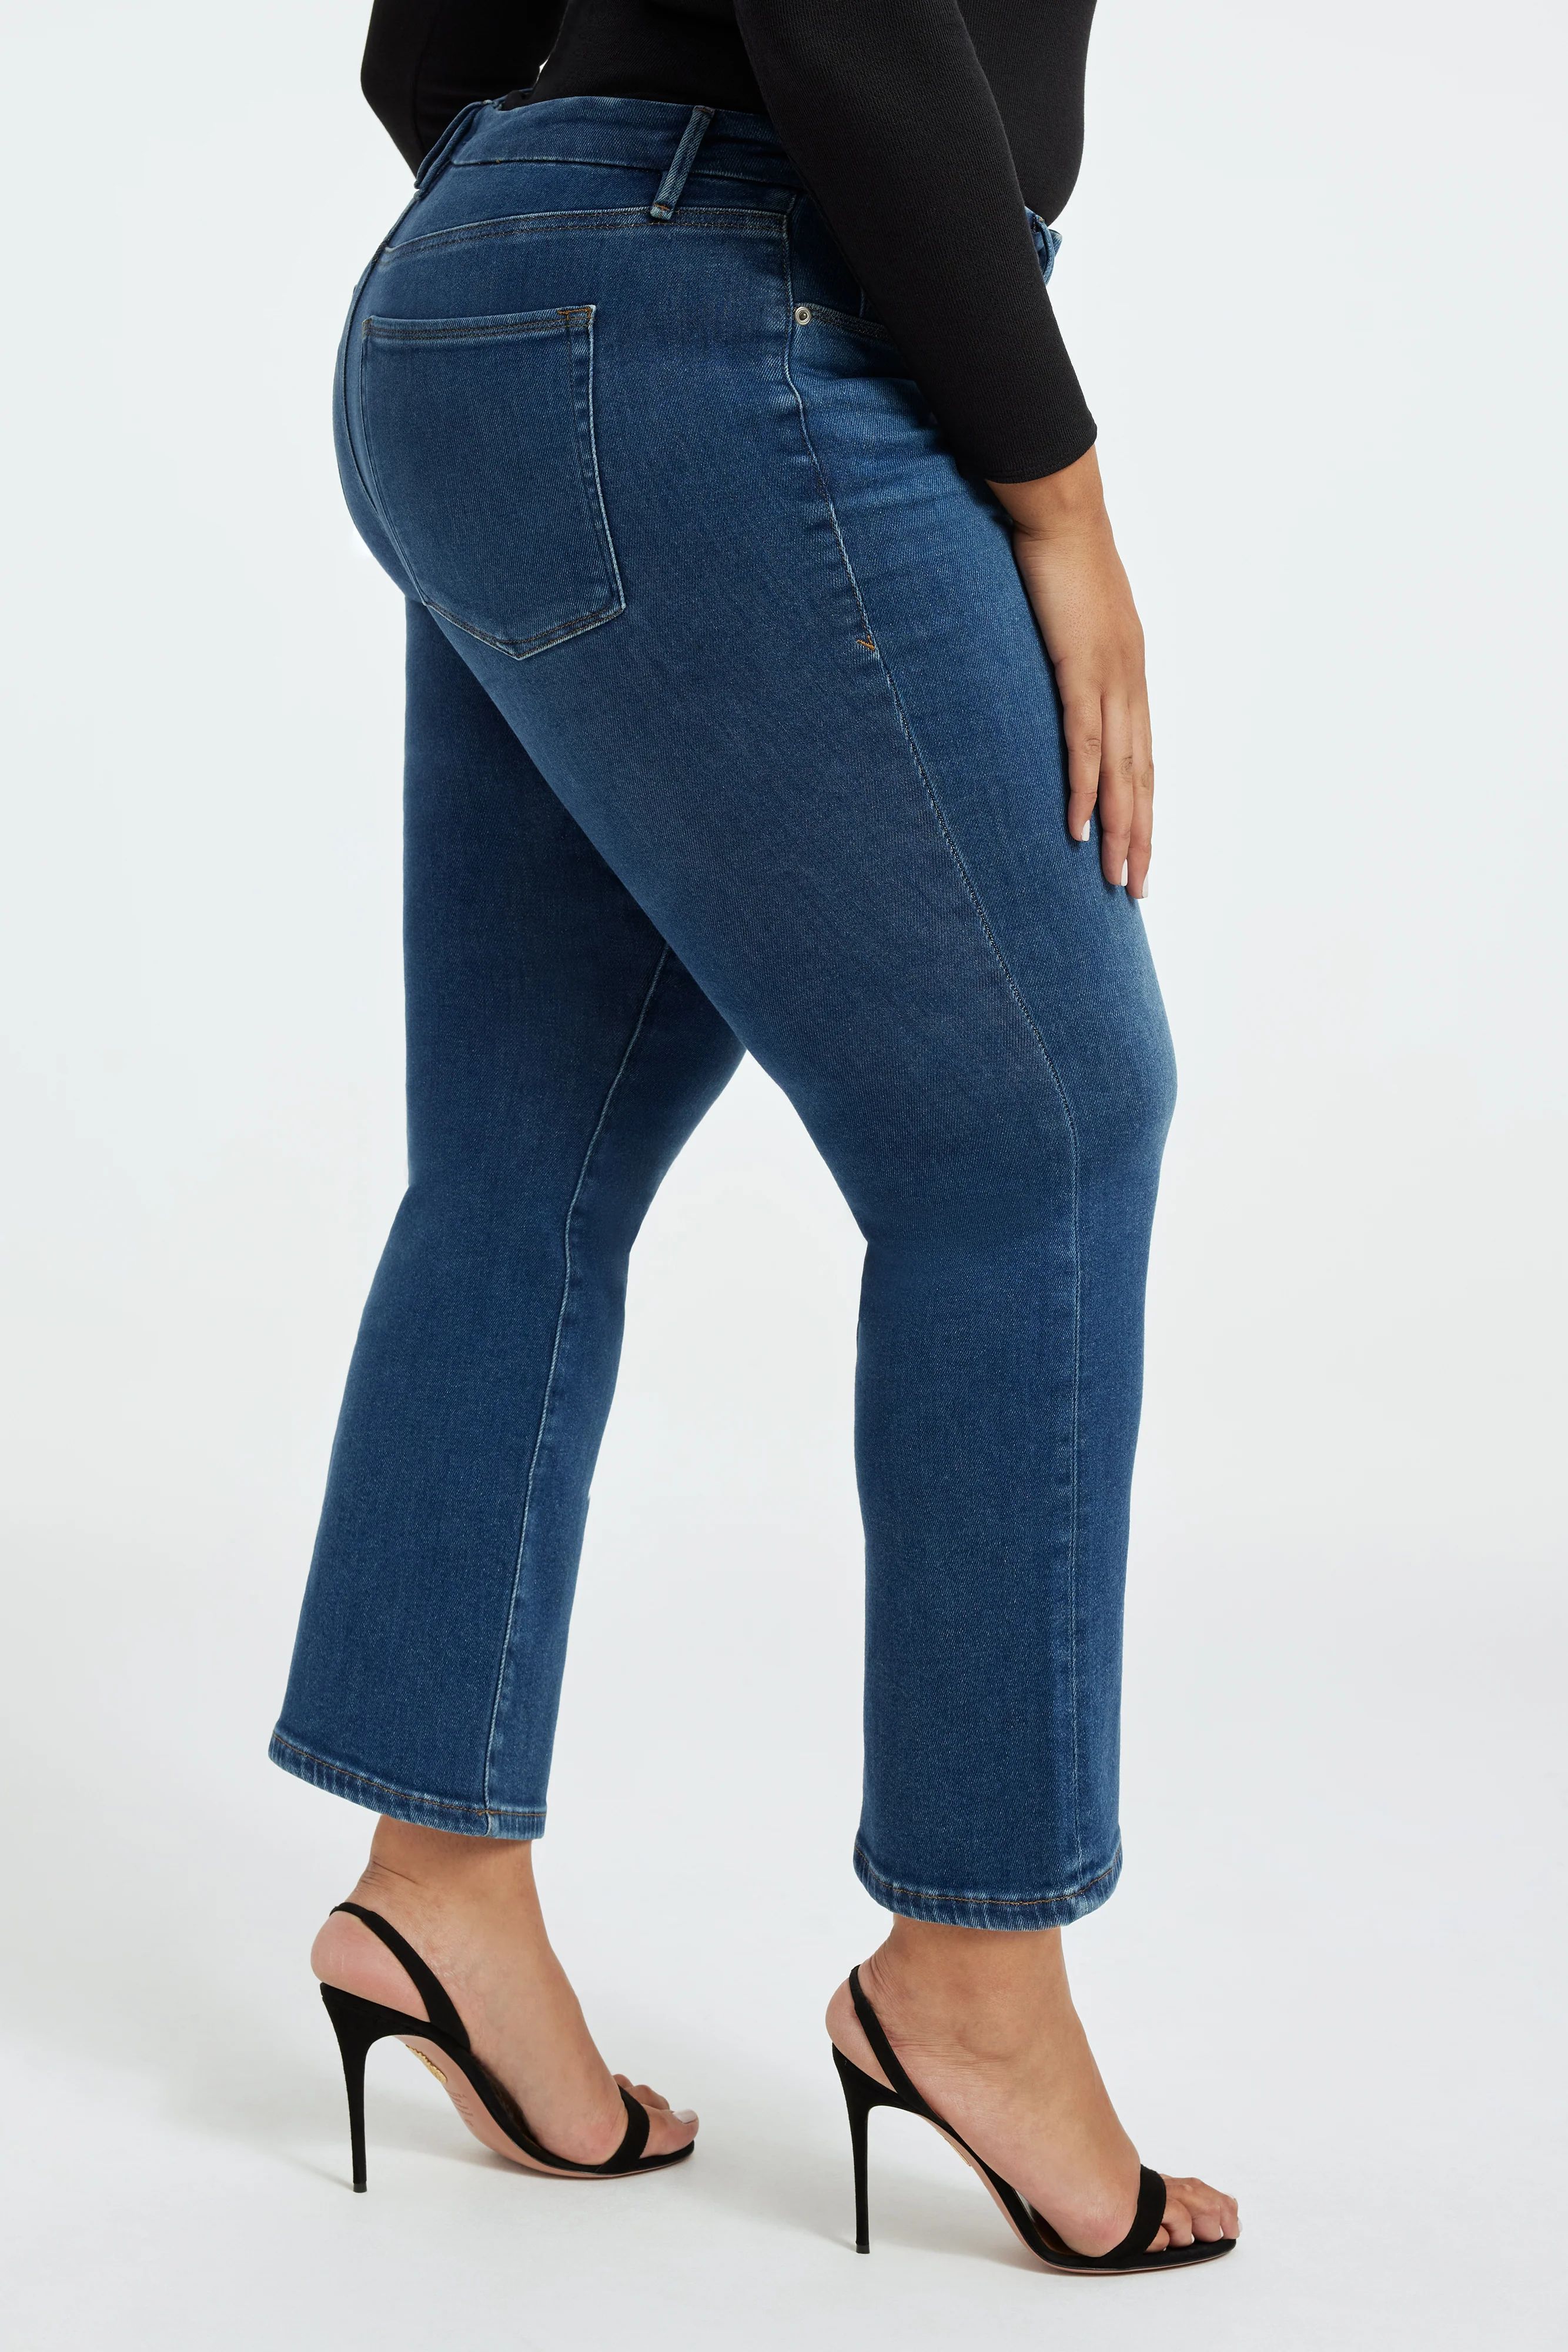 GOOD LEGS CROPPED MINI BOOT JEANS | BLUE811 | Good American